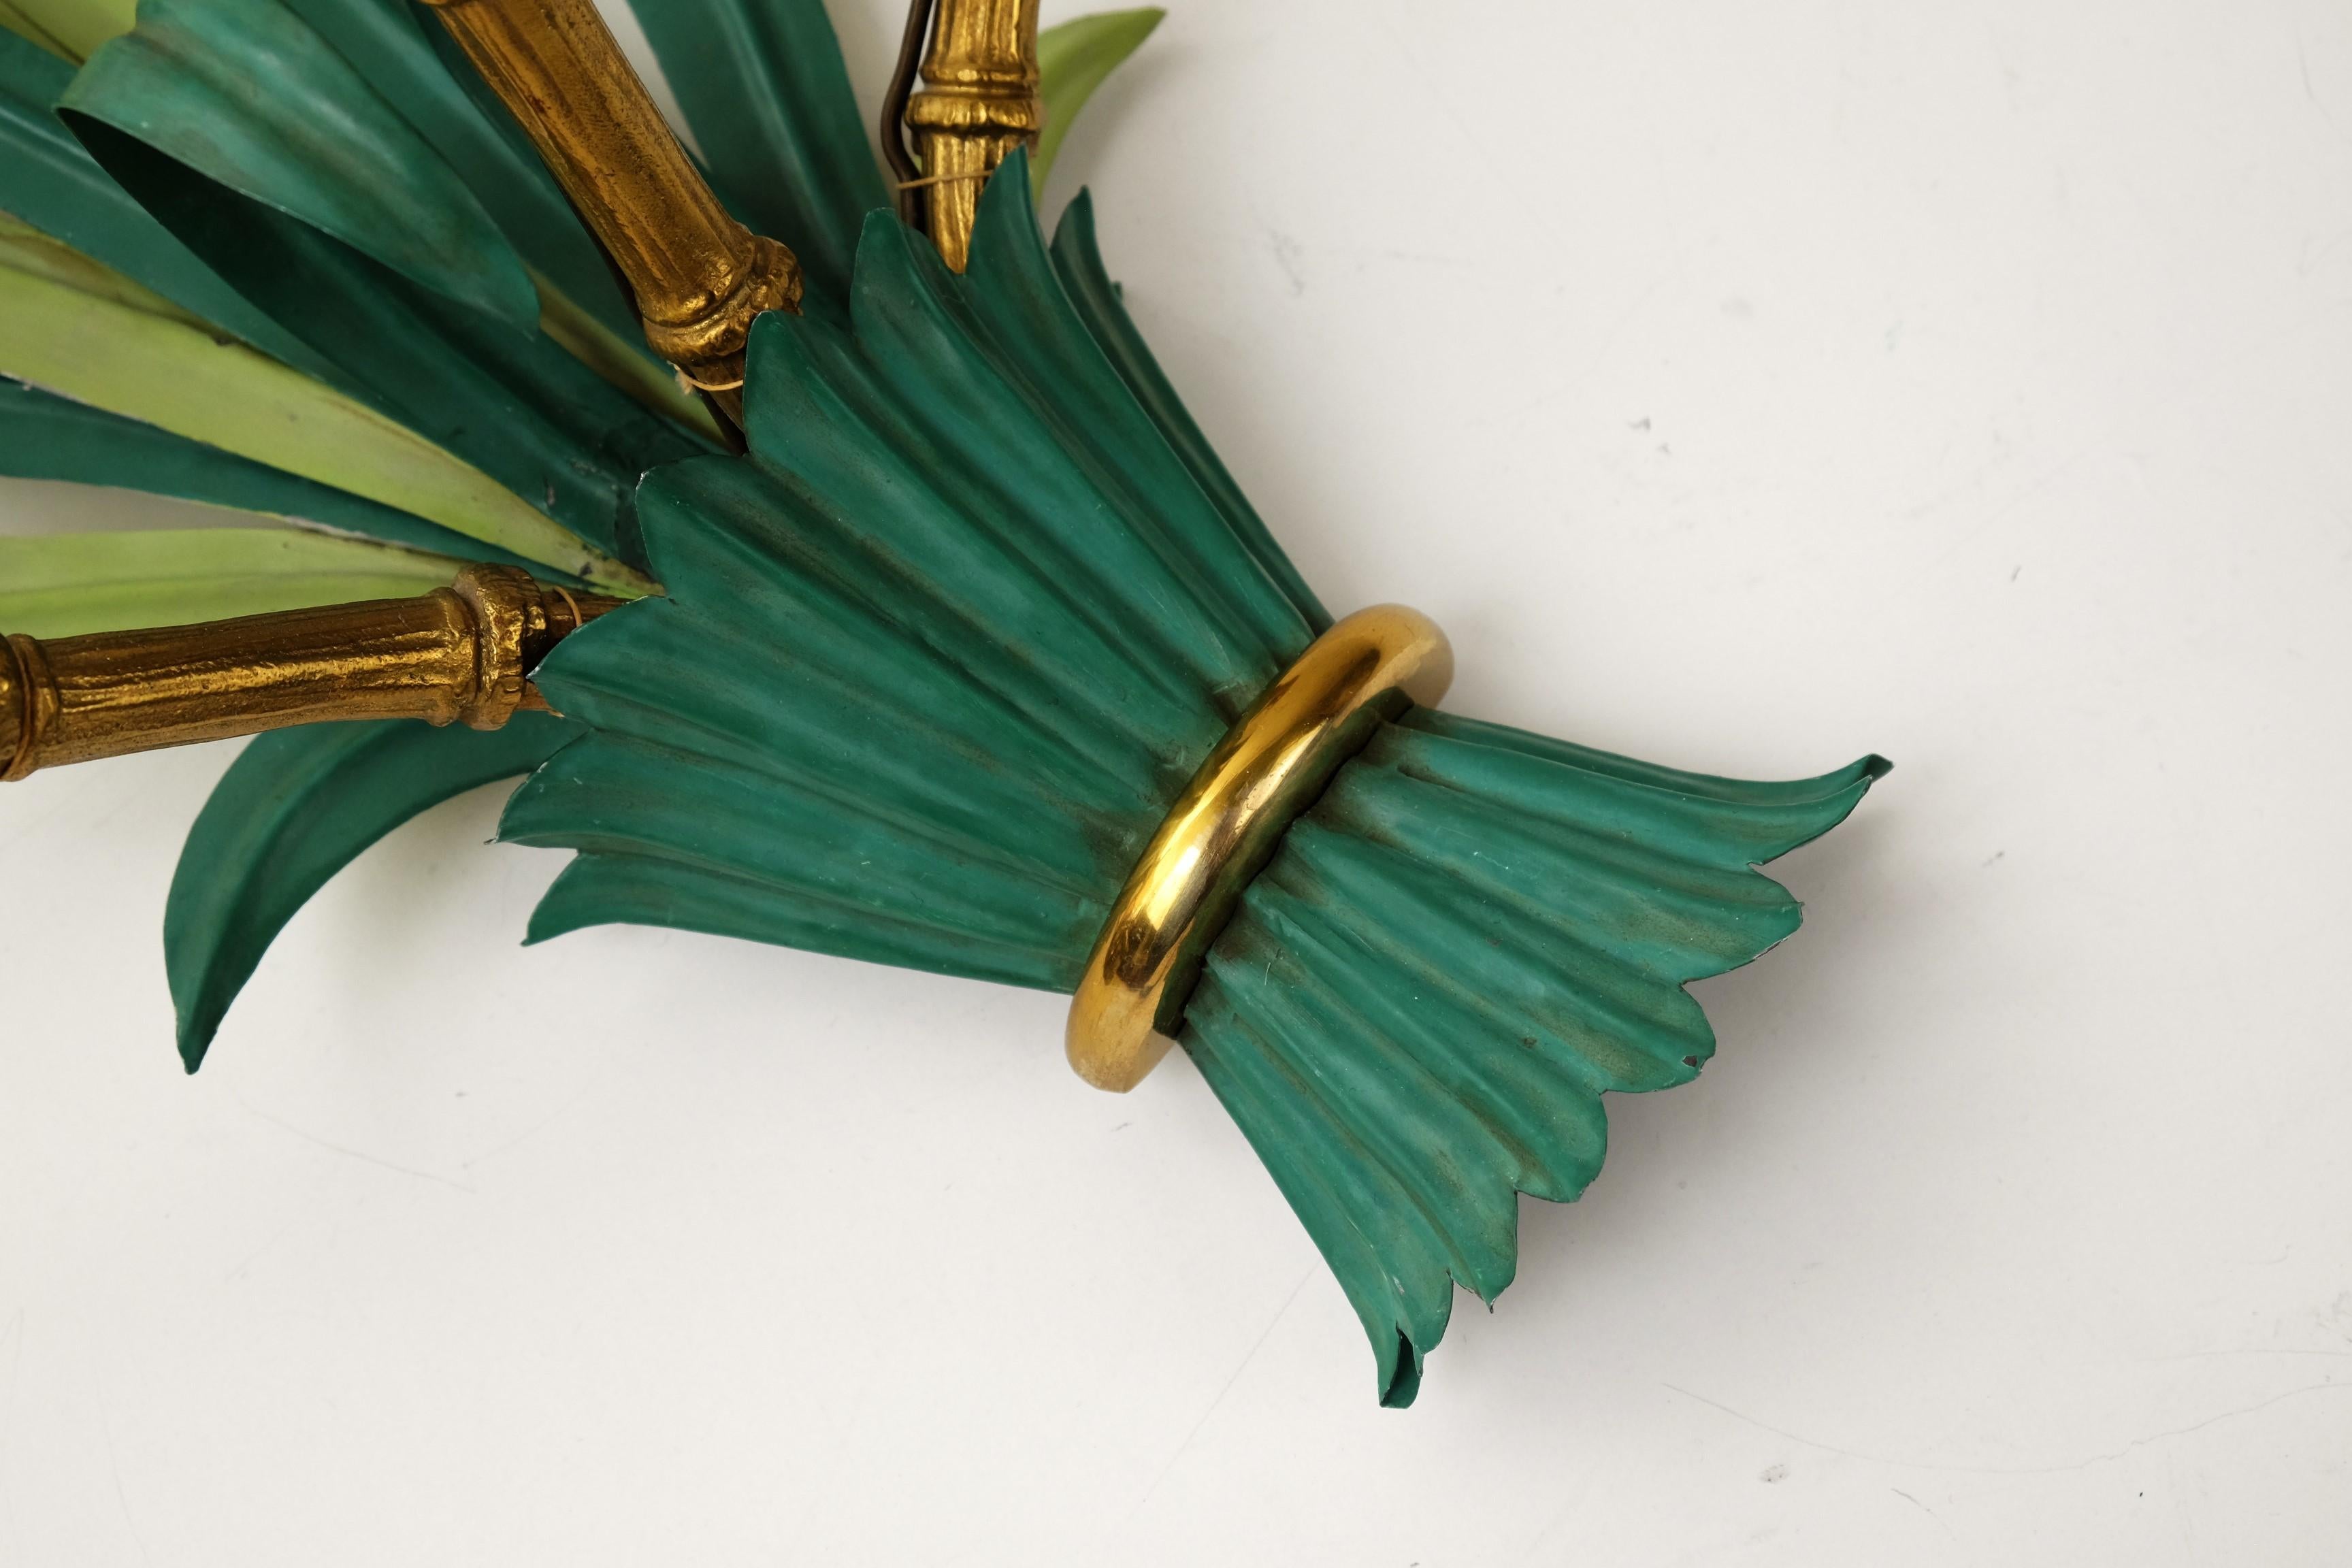 Pair of Wall Lamps / Sconces by Maison Bagues Bamboo Palm Leaves, France 1950s For Sale 5